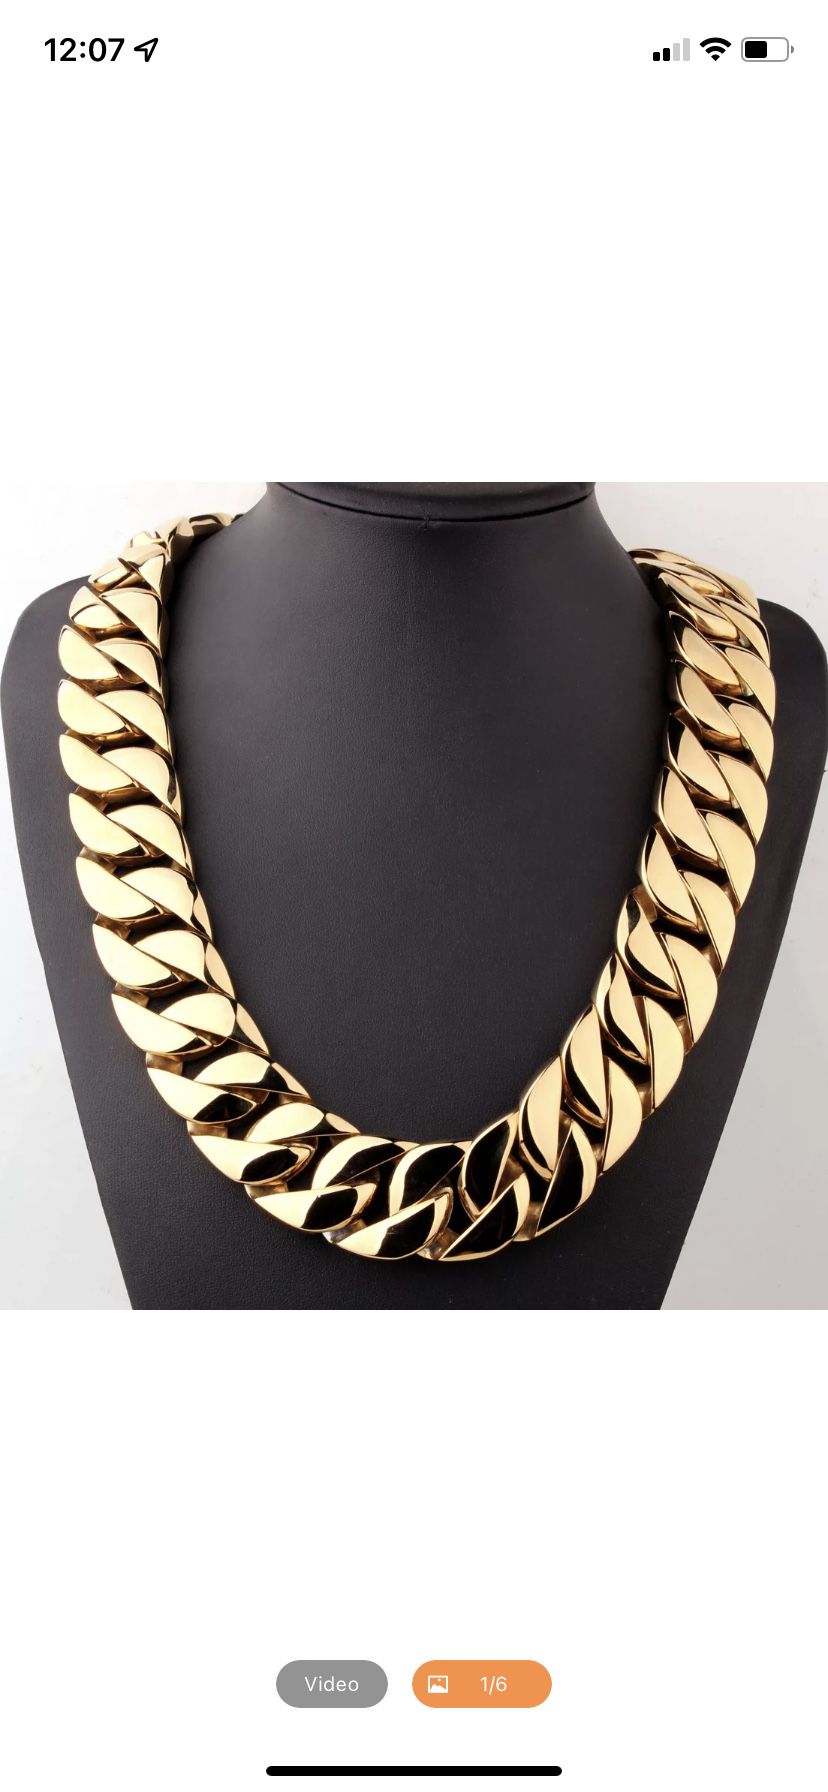 24k Necklace chain stainless steel Gold plated / 30 Inches